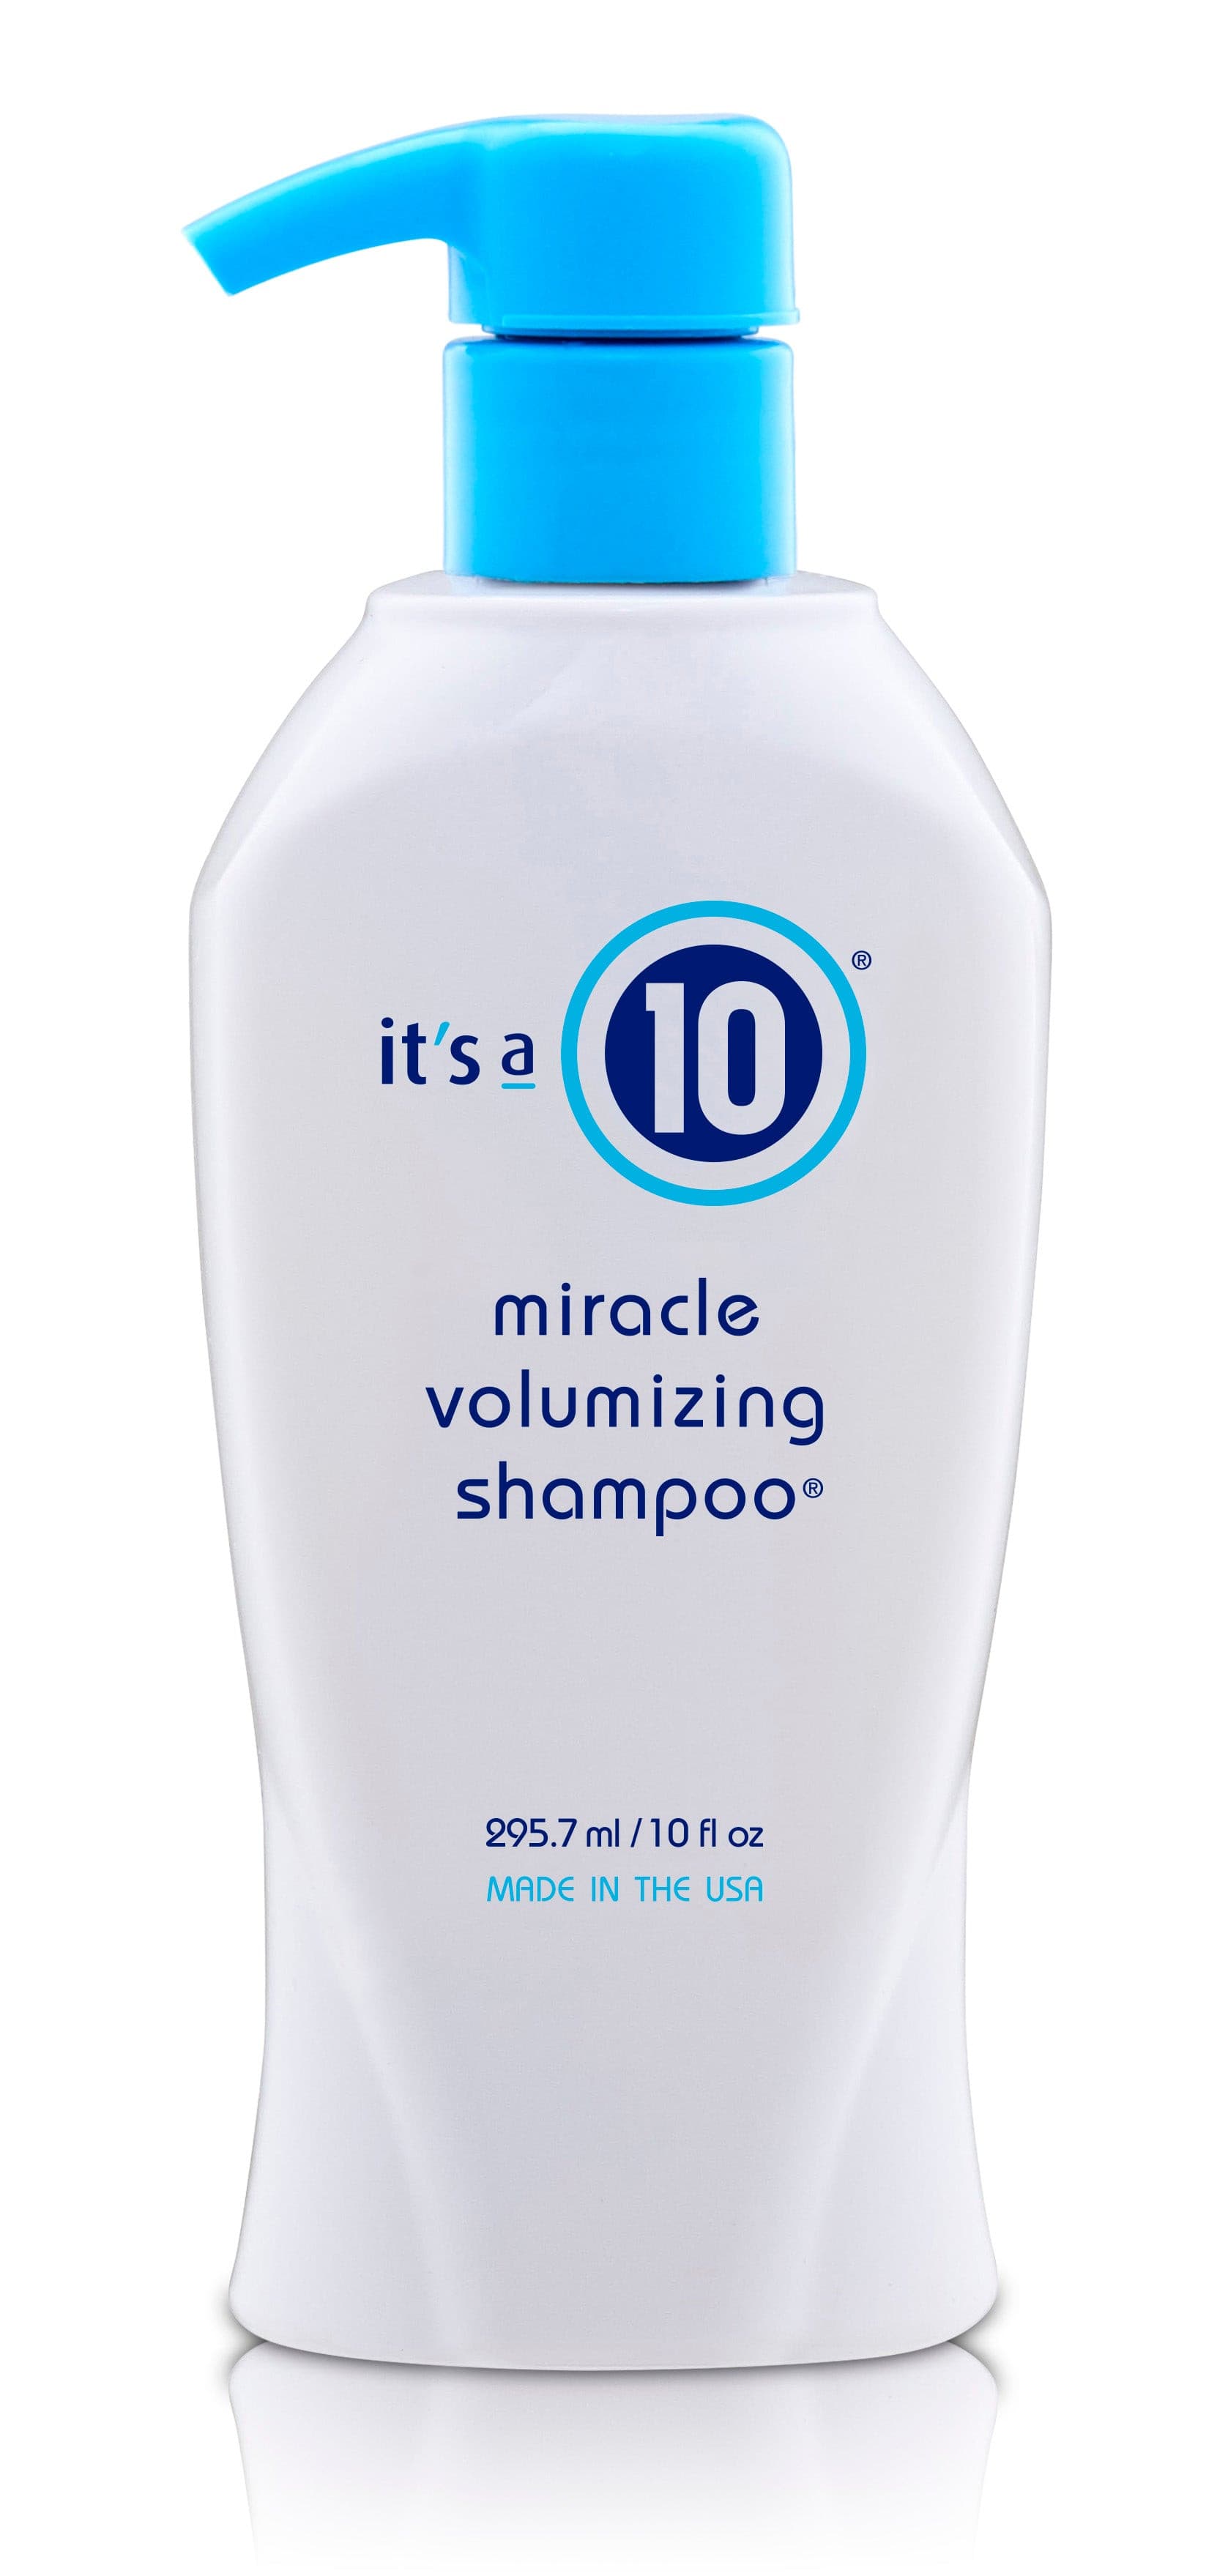 It's A 10 Miracle Daily Conditioner - 33.8 fl oz bottle